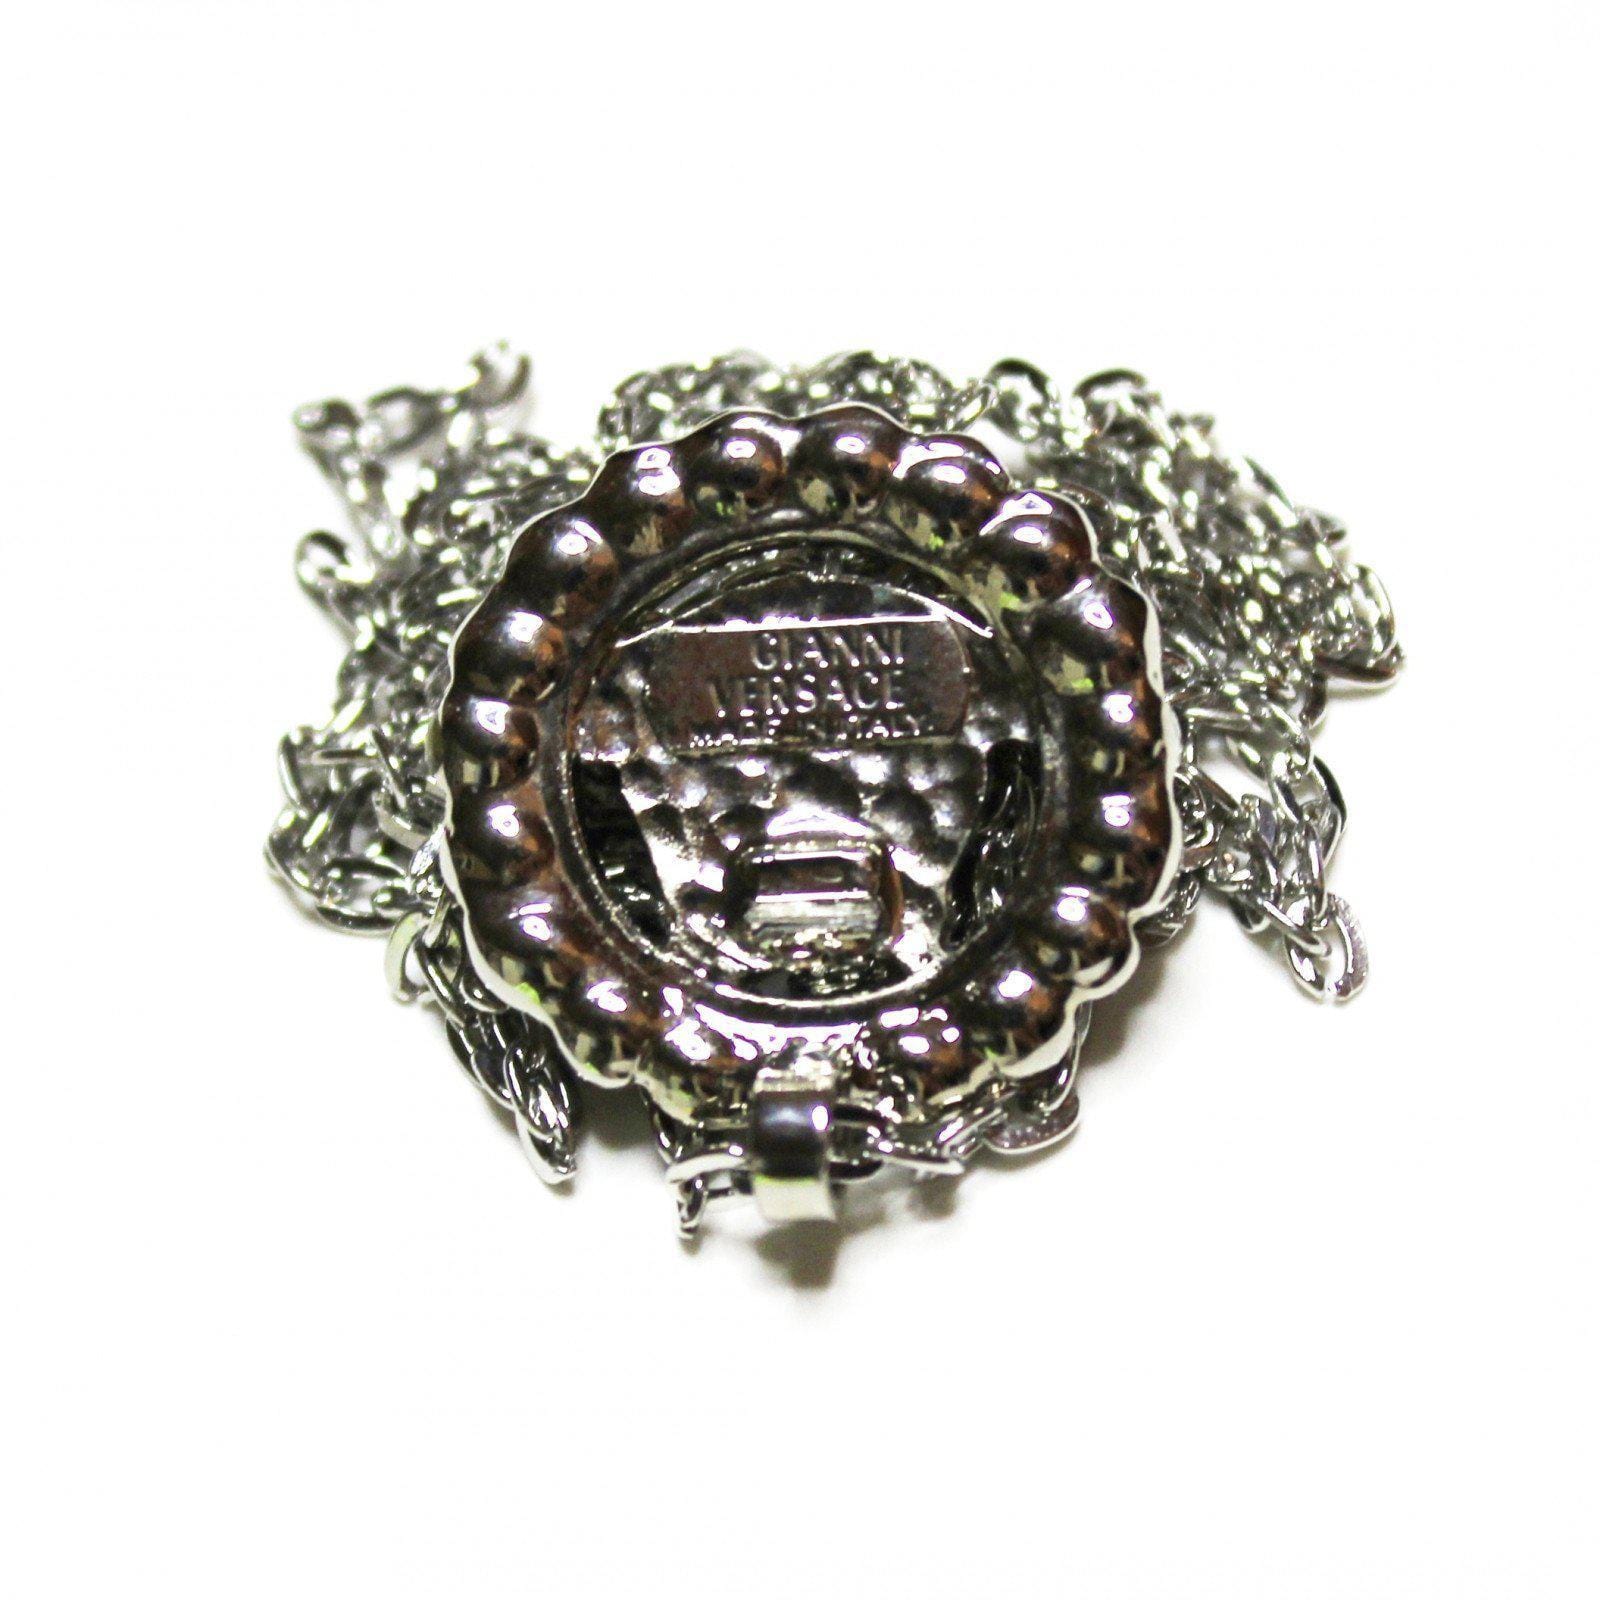 Small Silver Gianni Versace Upside Down Medusa Head Pendent Chain with Crystal Accents RSTKD Vintage